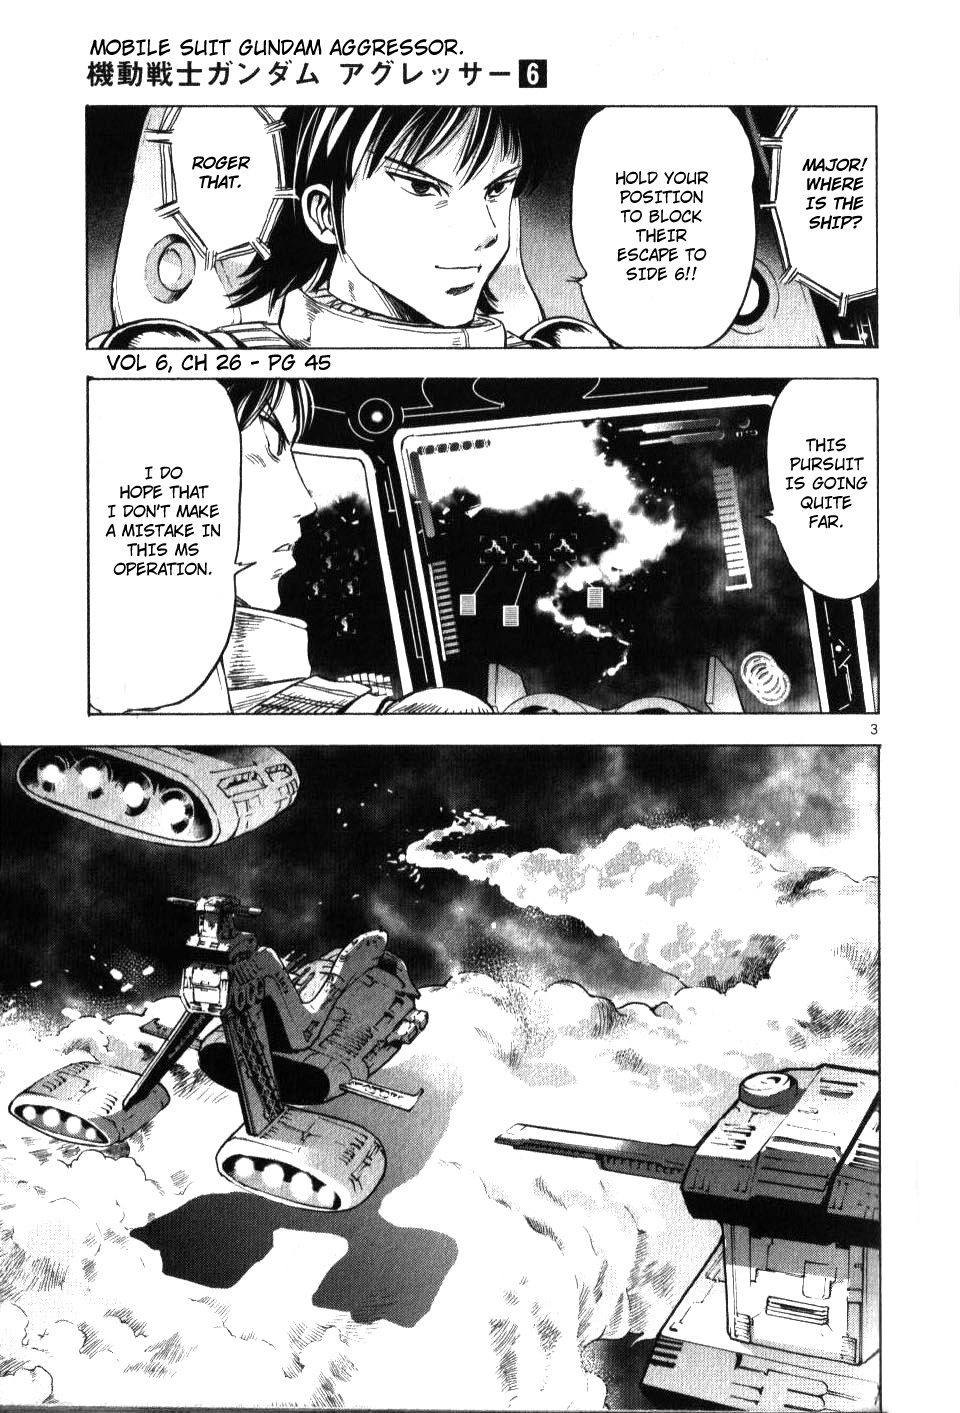 Mobile Suit Gundam Aggressor Vol.6 Chapter 26 - Picture 3